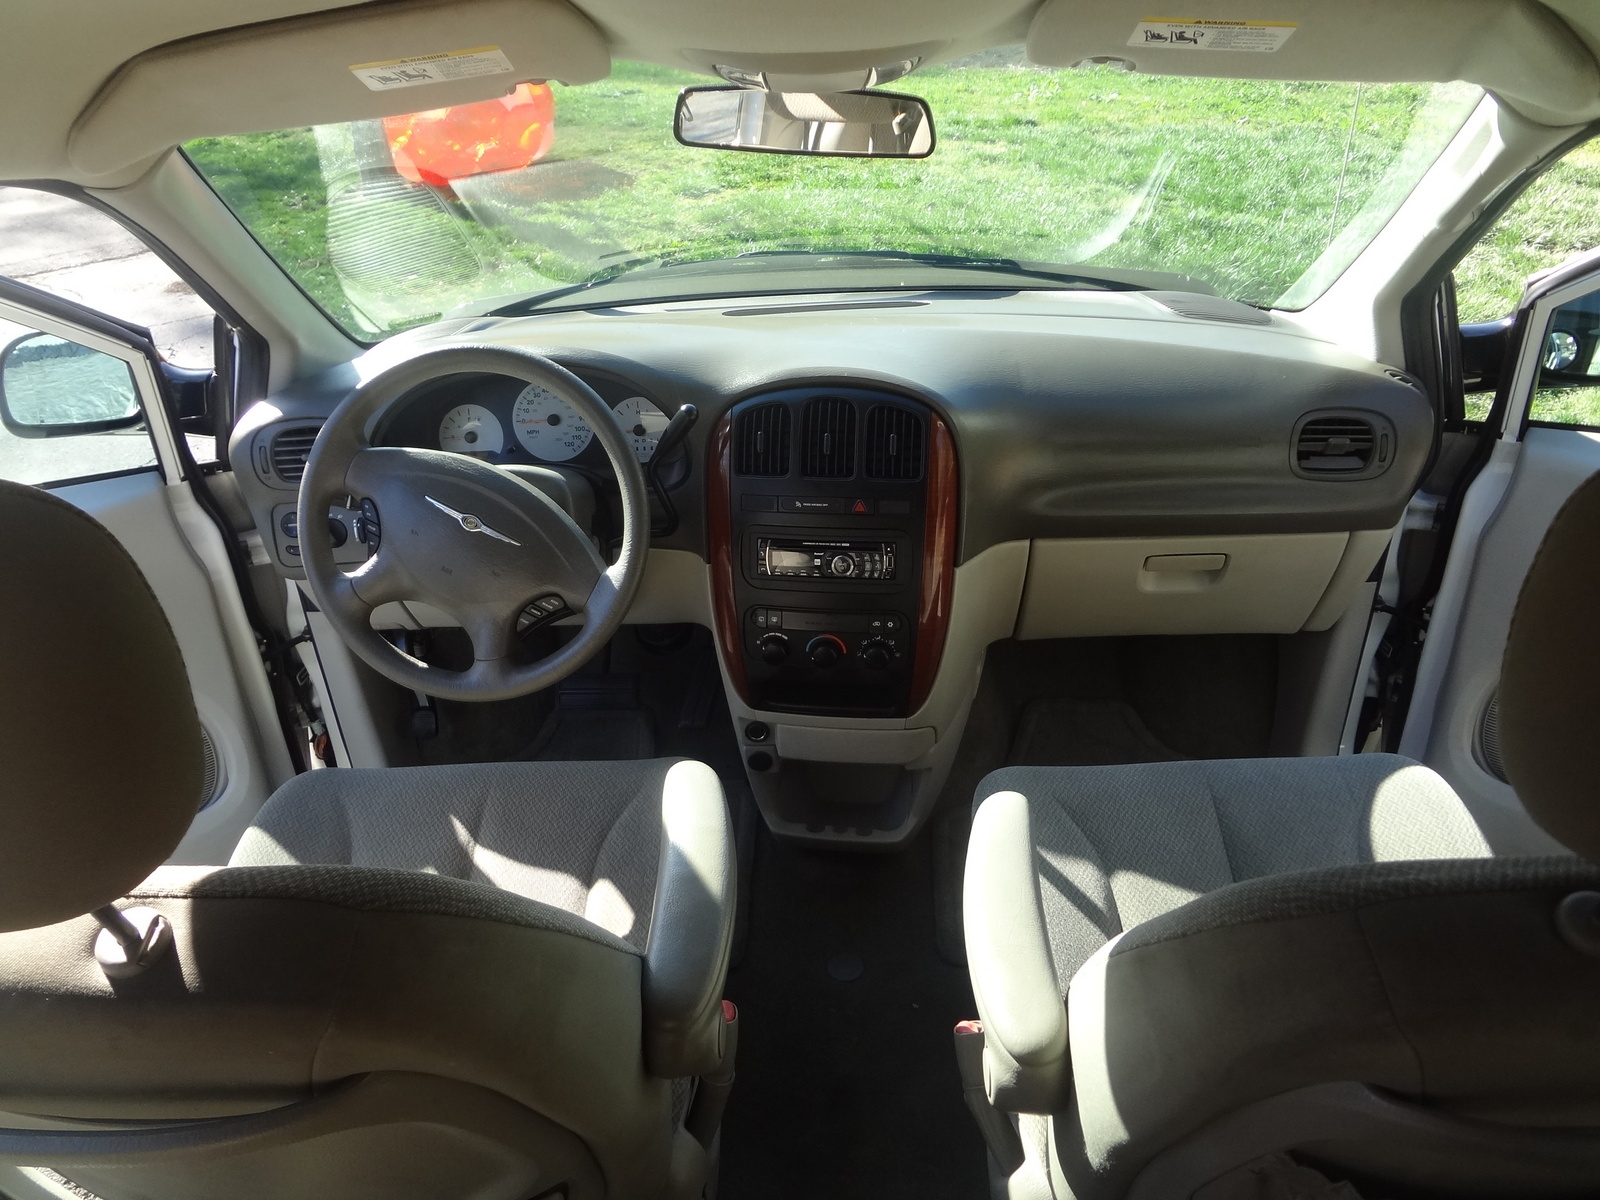 2006 Chrysler Town & Country - Pictures - CarGurus